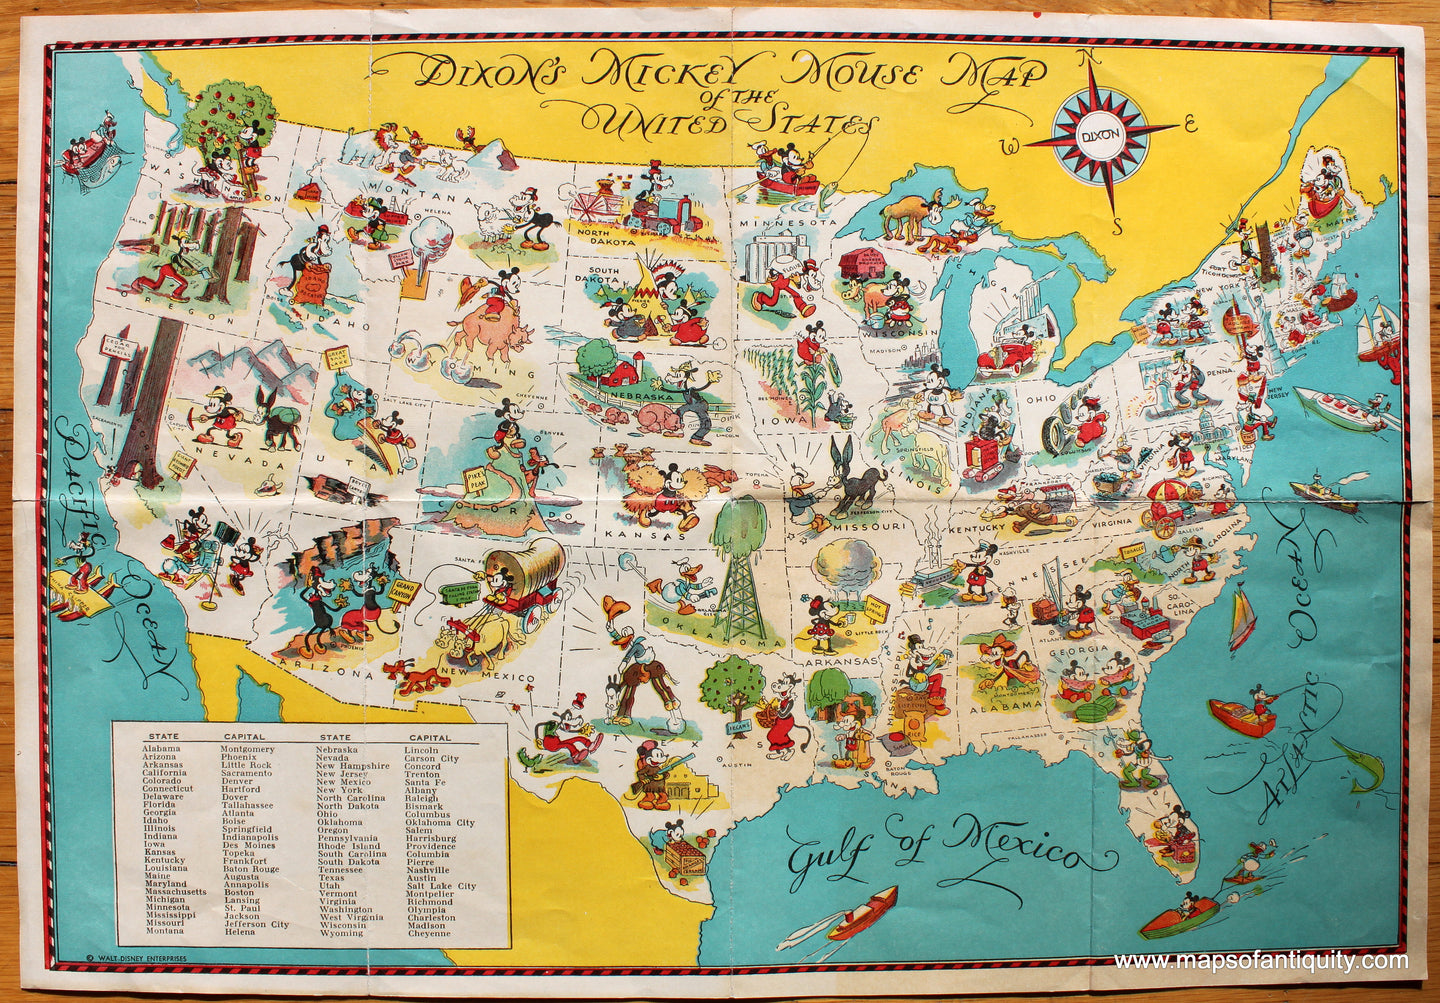 Antique-Printed-Color-Pictorial-Map-Dixon's-Mickey-Mouse-Map-of-the-United-States-*****SOLD*****-United-States--c.-1935-Walt-Disney-Enterprises-Maps-Of-Antiquity-1800s-19th-century